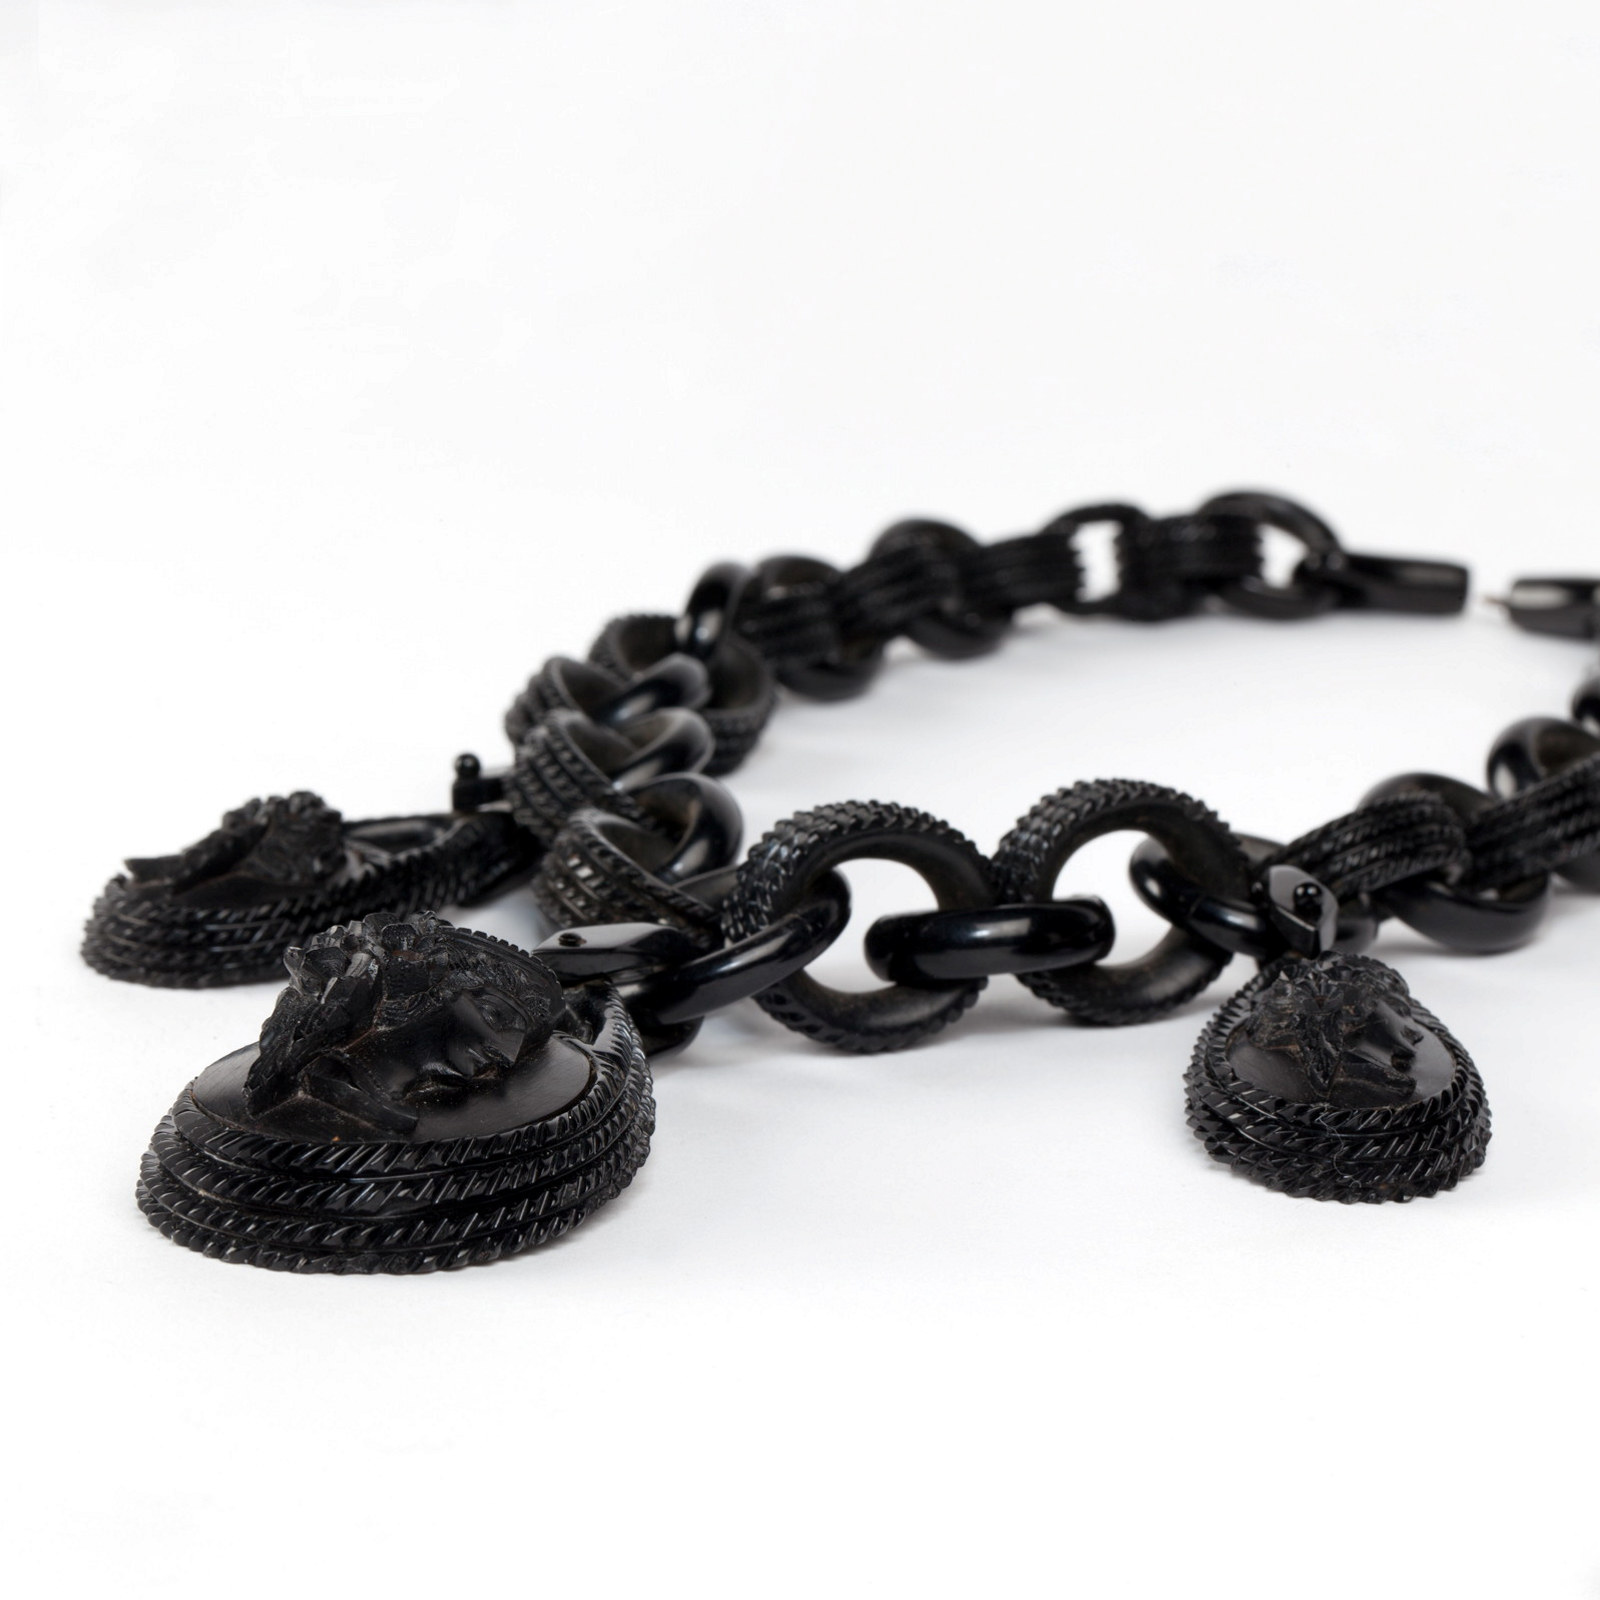 Detail view of pendants on a vulcanite necklace. The necklace is composed of 32 graduating oval links and three oval pendants.